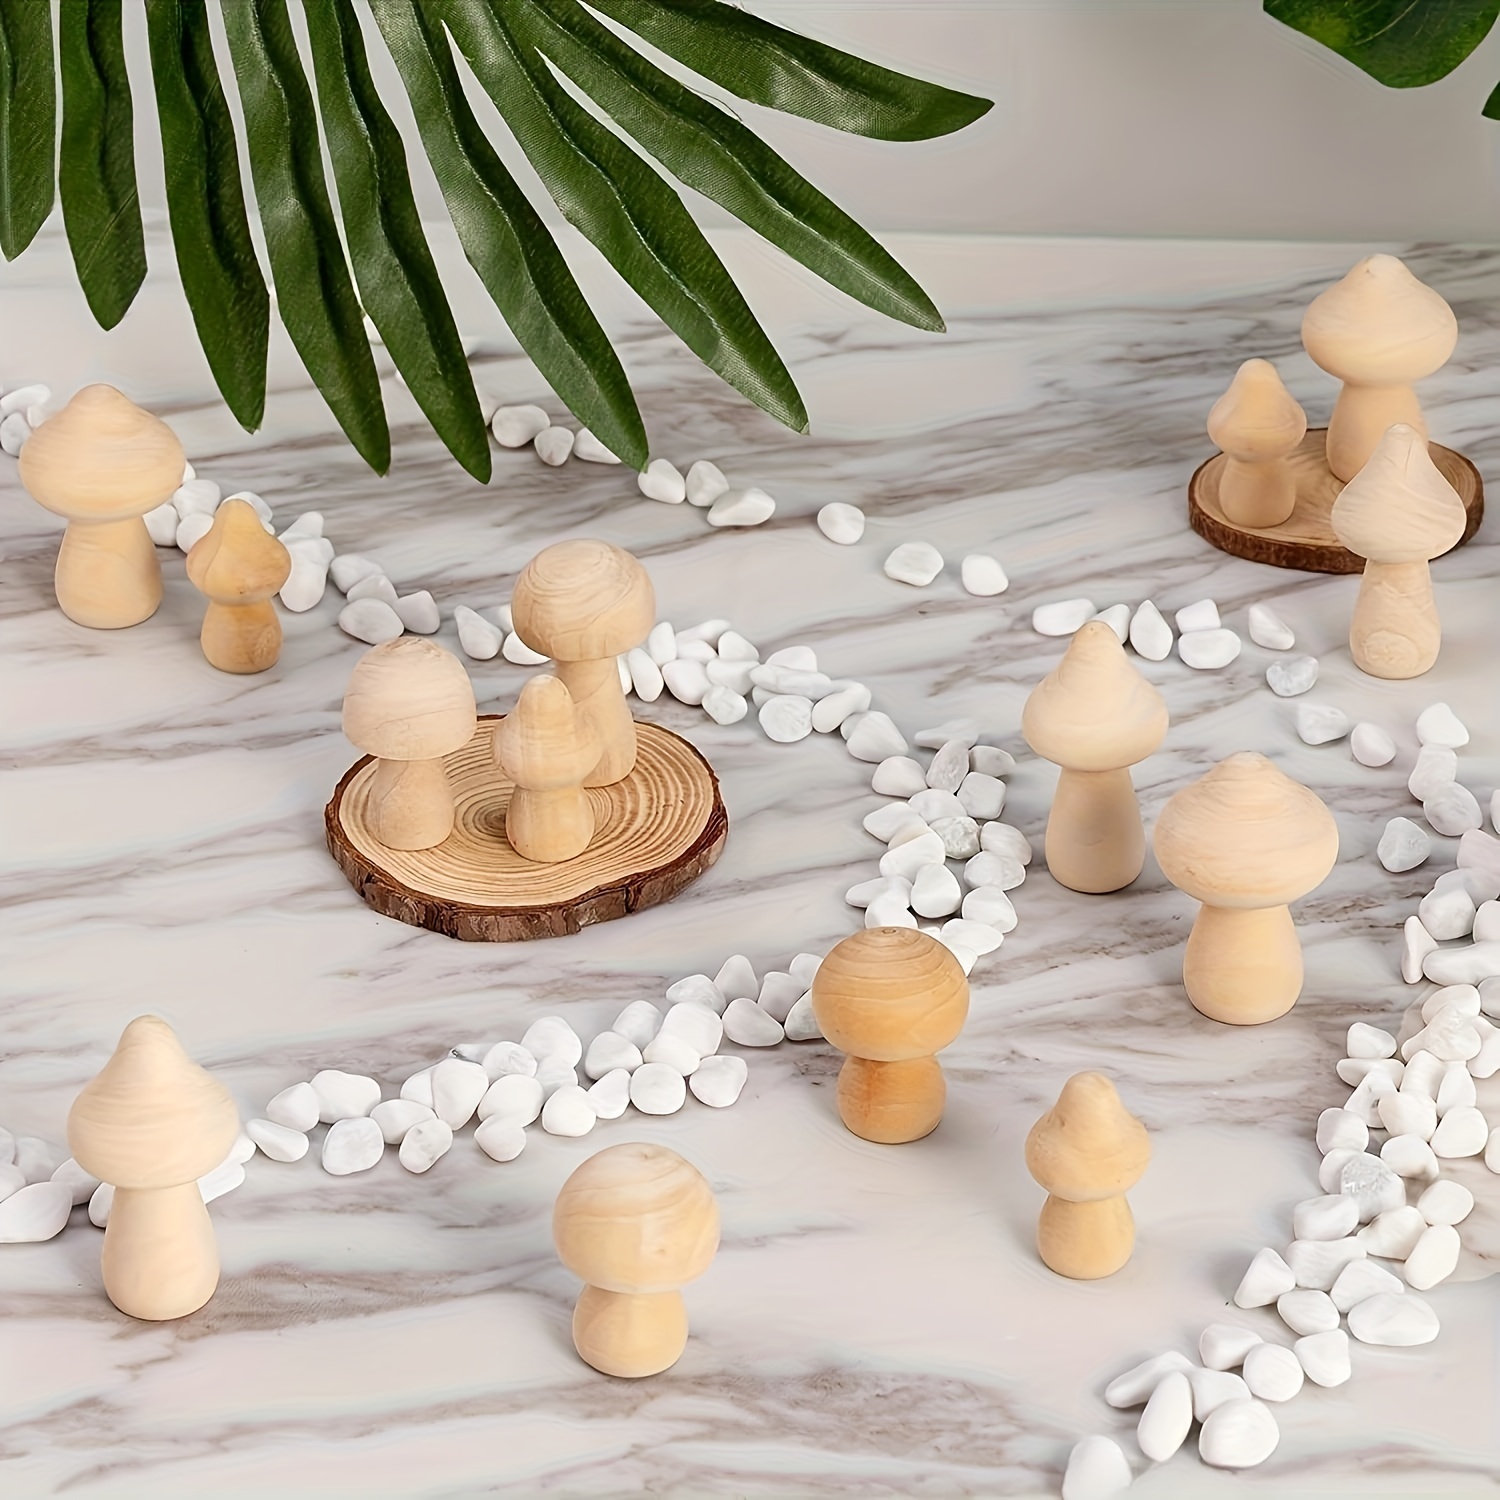 21pcs Wooden Mushroom to Crafts, 7 Different Sizes Natural Wood Mushrooms for Paint, Unfinished Unpainted Wooden Mushrooms Figures Decor for Arts & CR